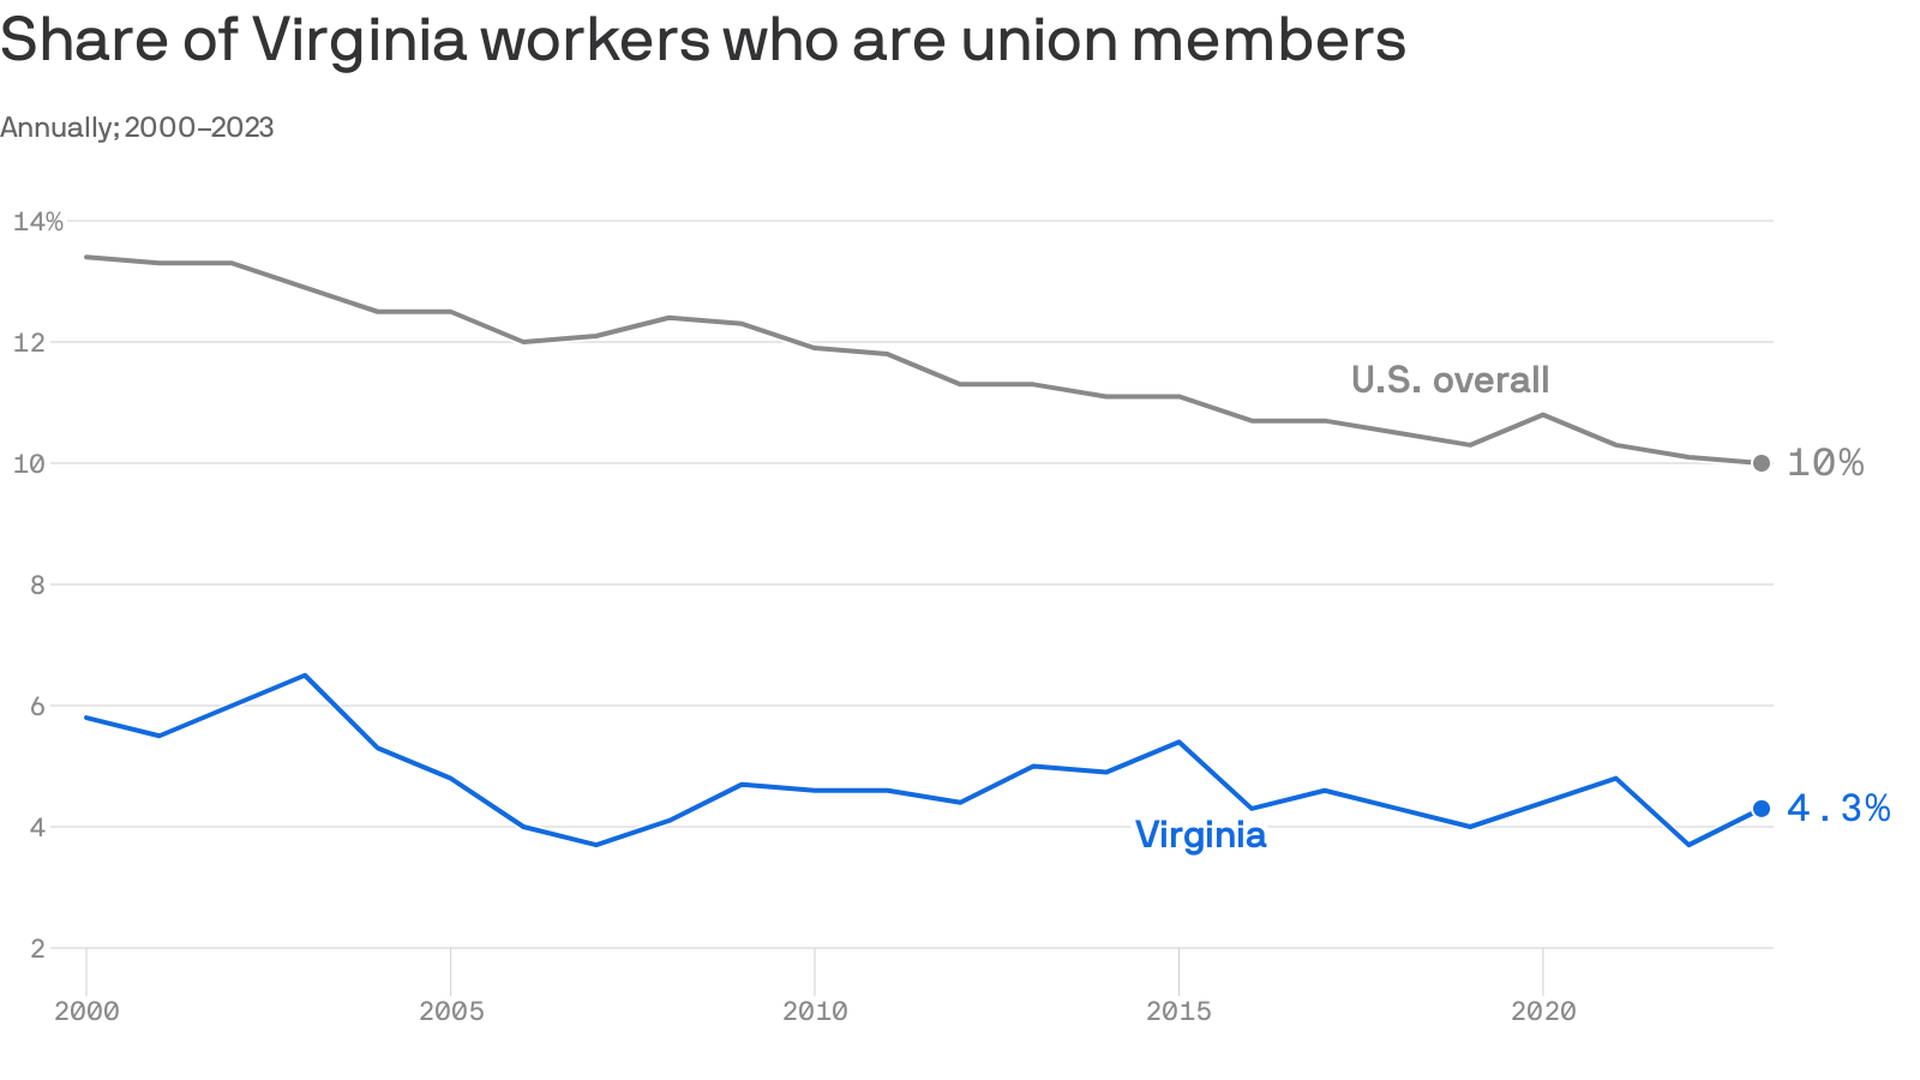 A graph of the "share of Virginia workers who are union members" from 2000 to 2023 which shows the decline of the U.S. overall compared to Virginia's slow rise.